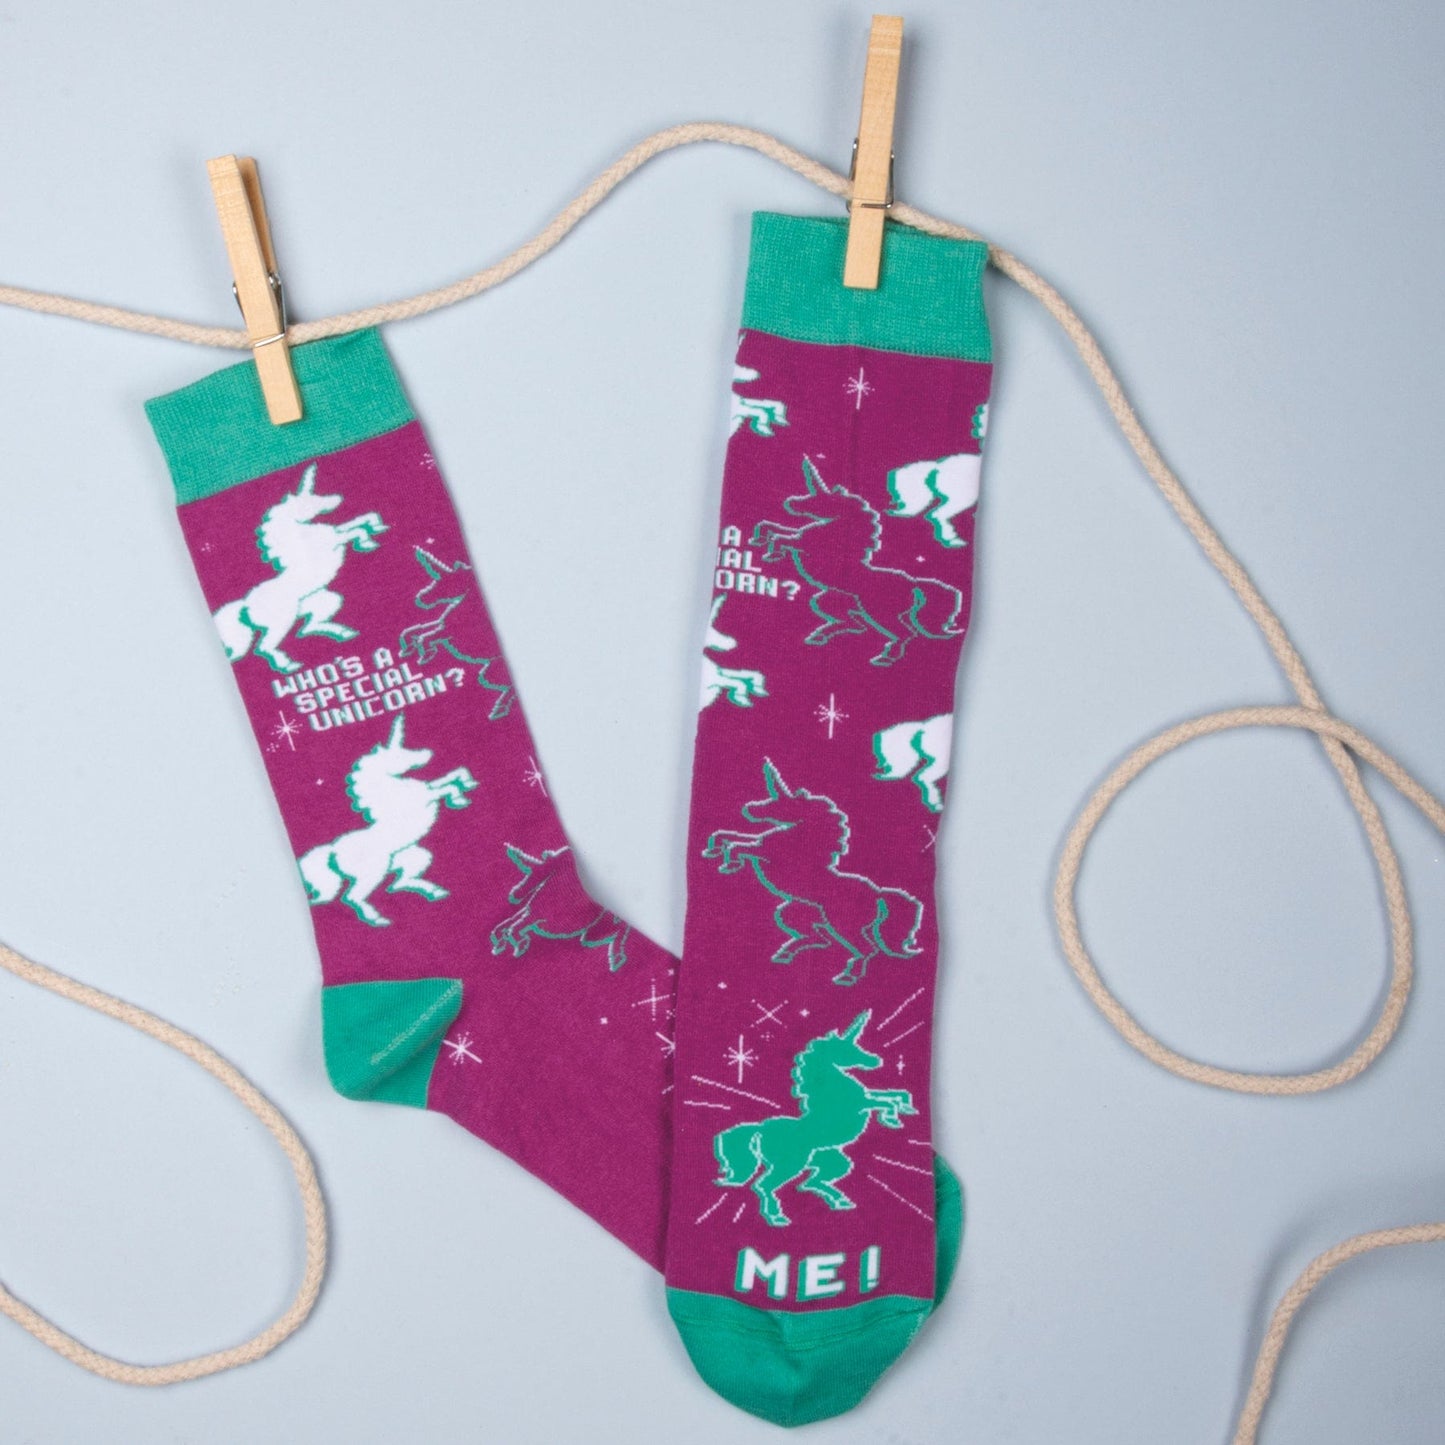 Socks One Size Fits Most Socks - Who's A Special Unicorn? Me! PBK-39465